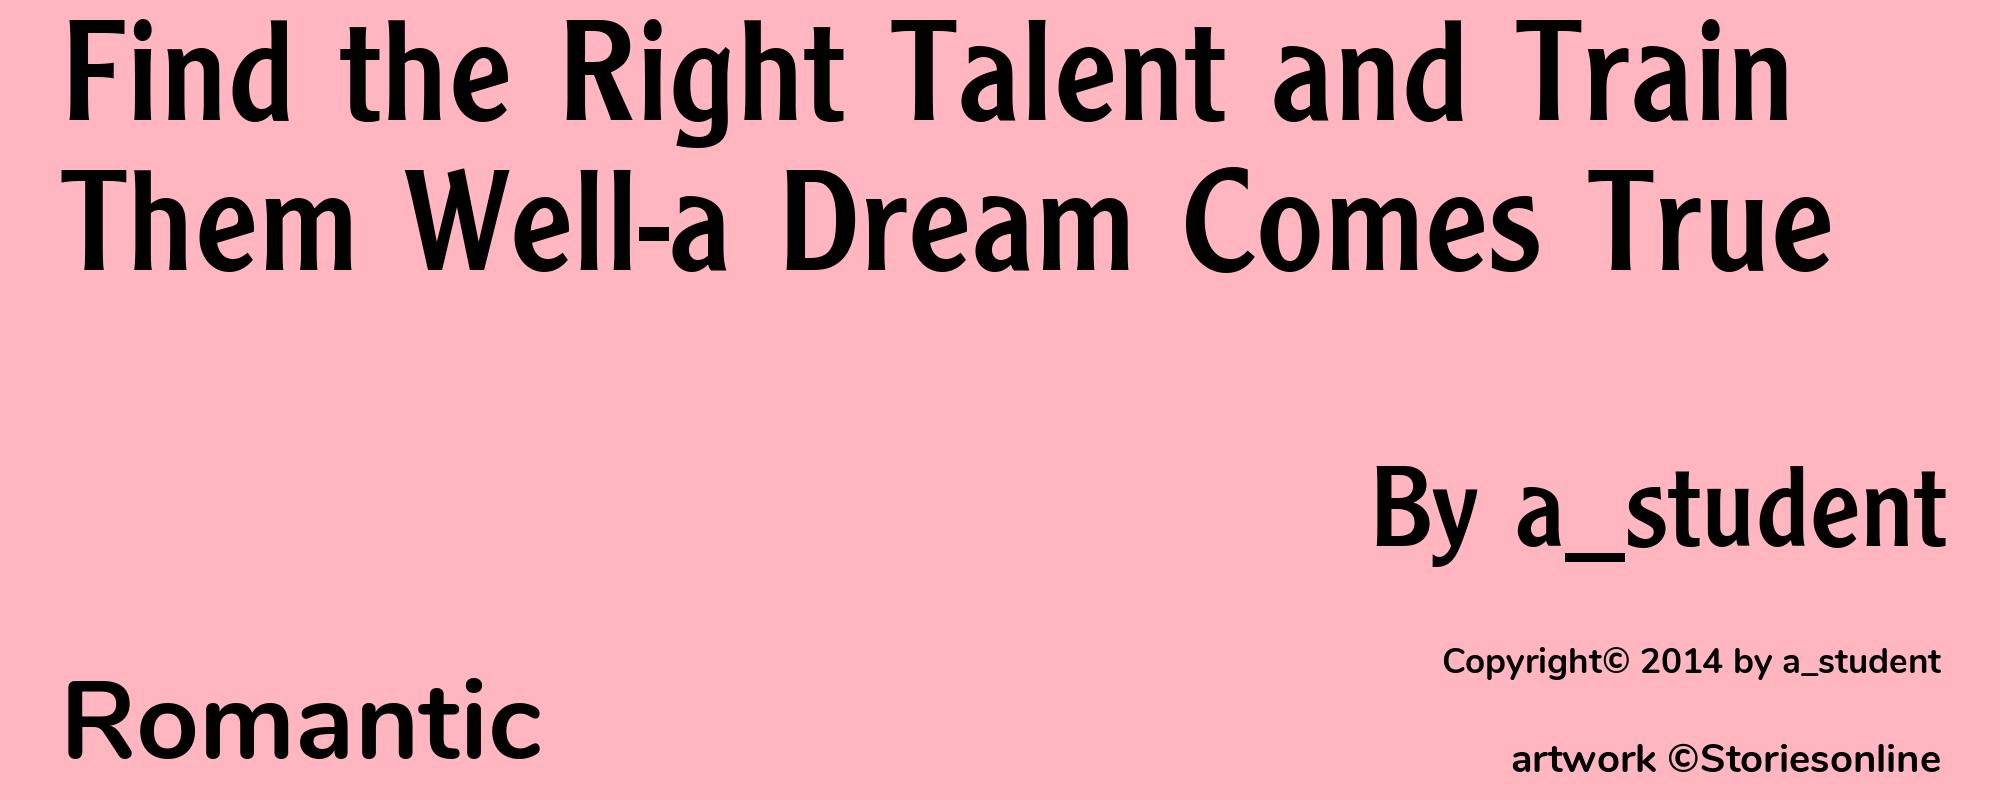 Find the Right Talent and Train Them Well-a Dream Comes True - Cover